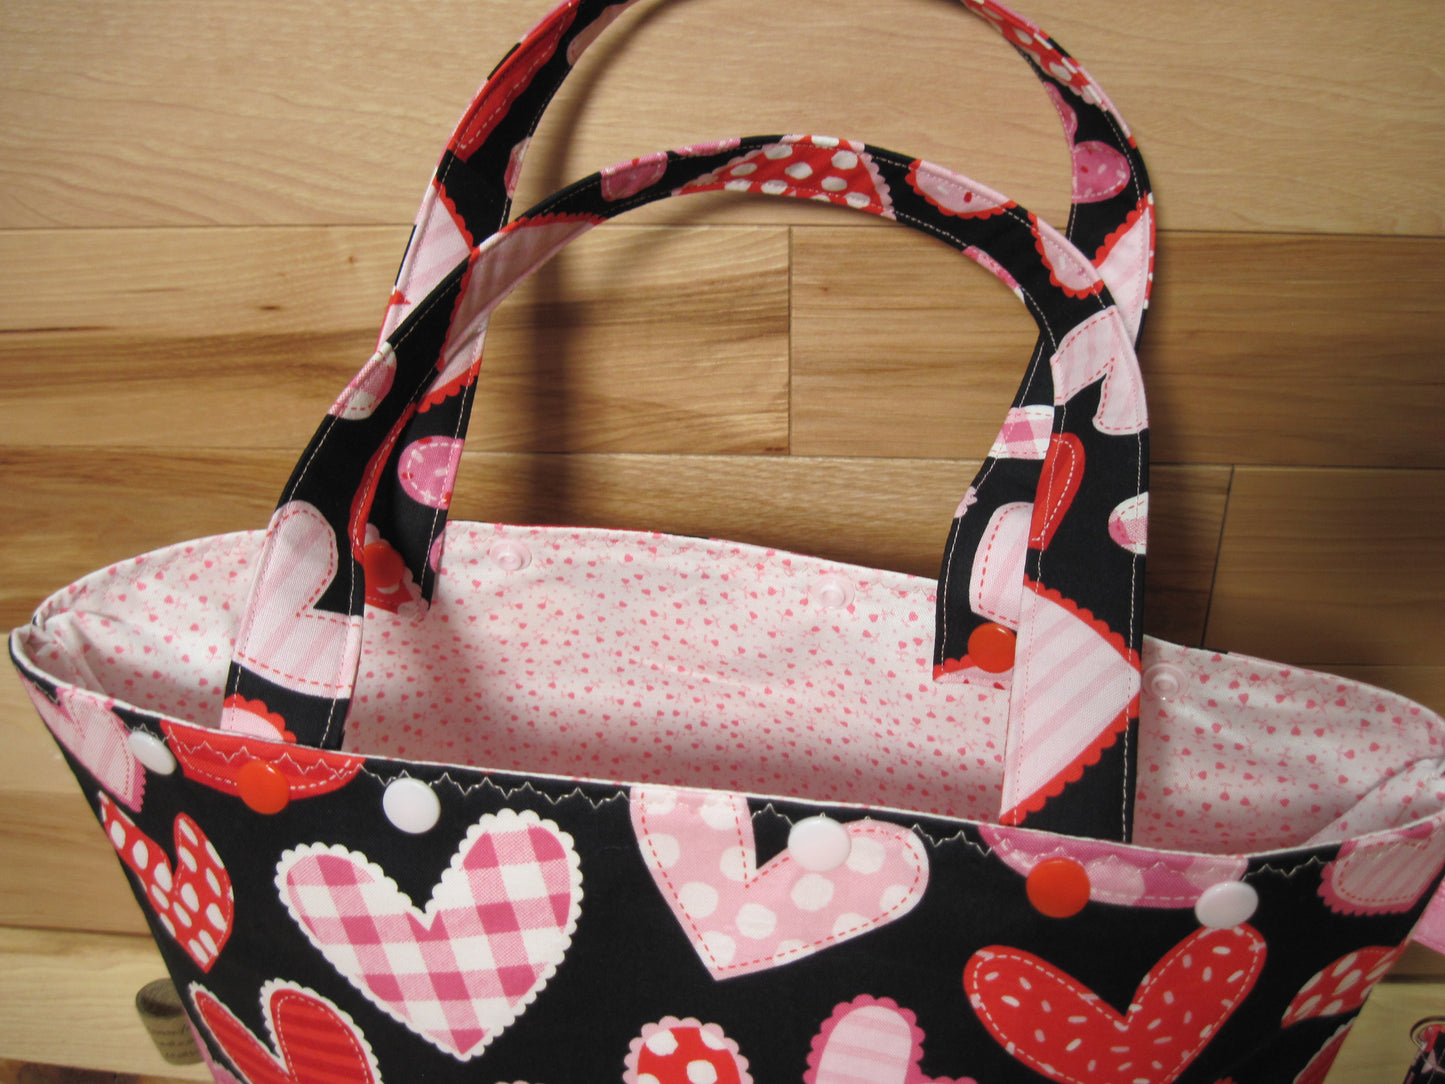 Large Valentine's Day Hearts w/ pink, snaps & removable handles project bag